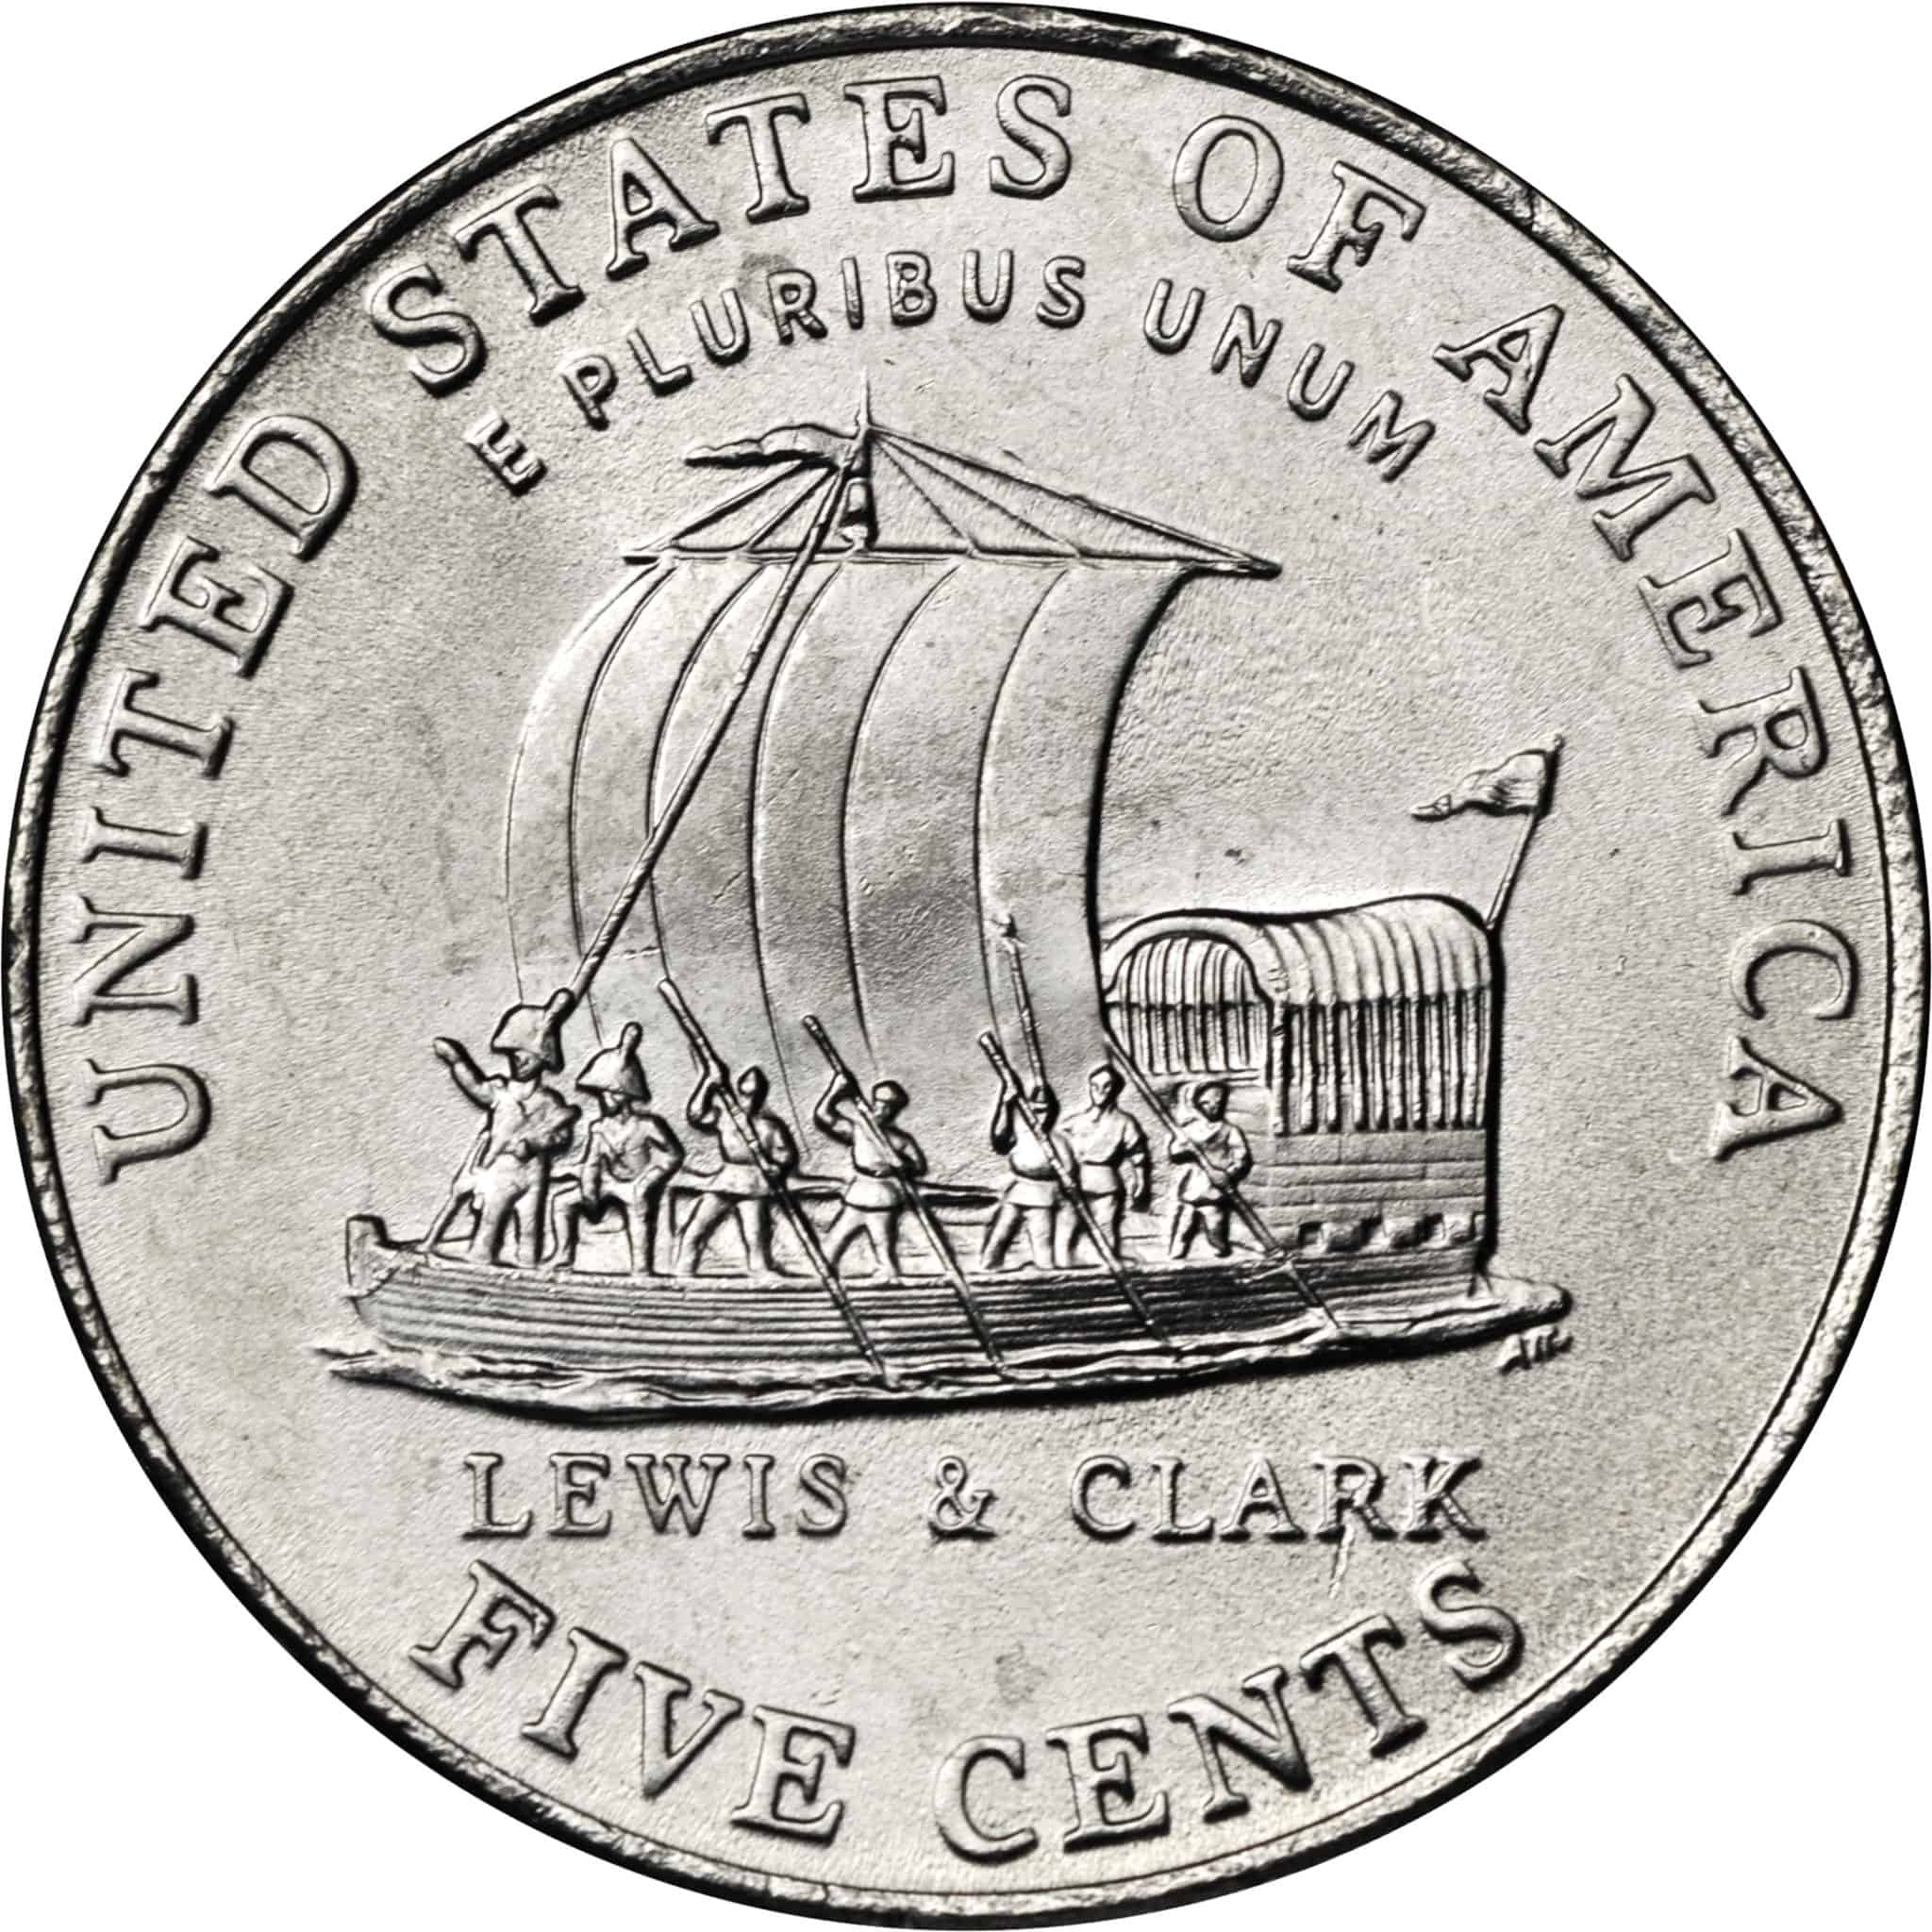 The Reverse of the 2004 Keelboat Nickel